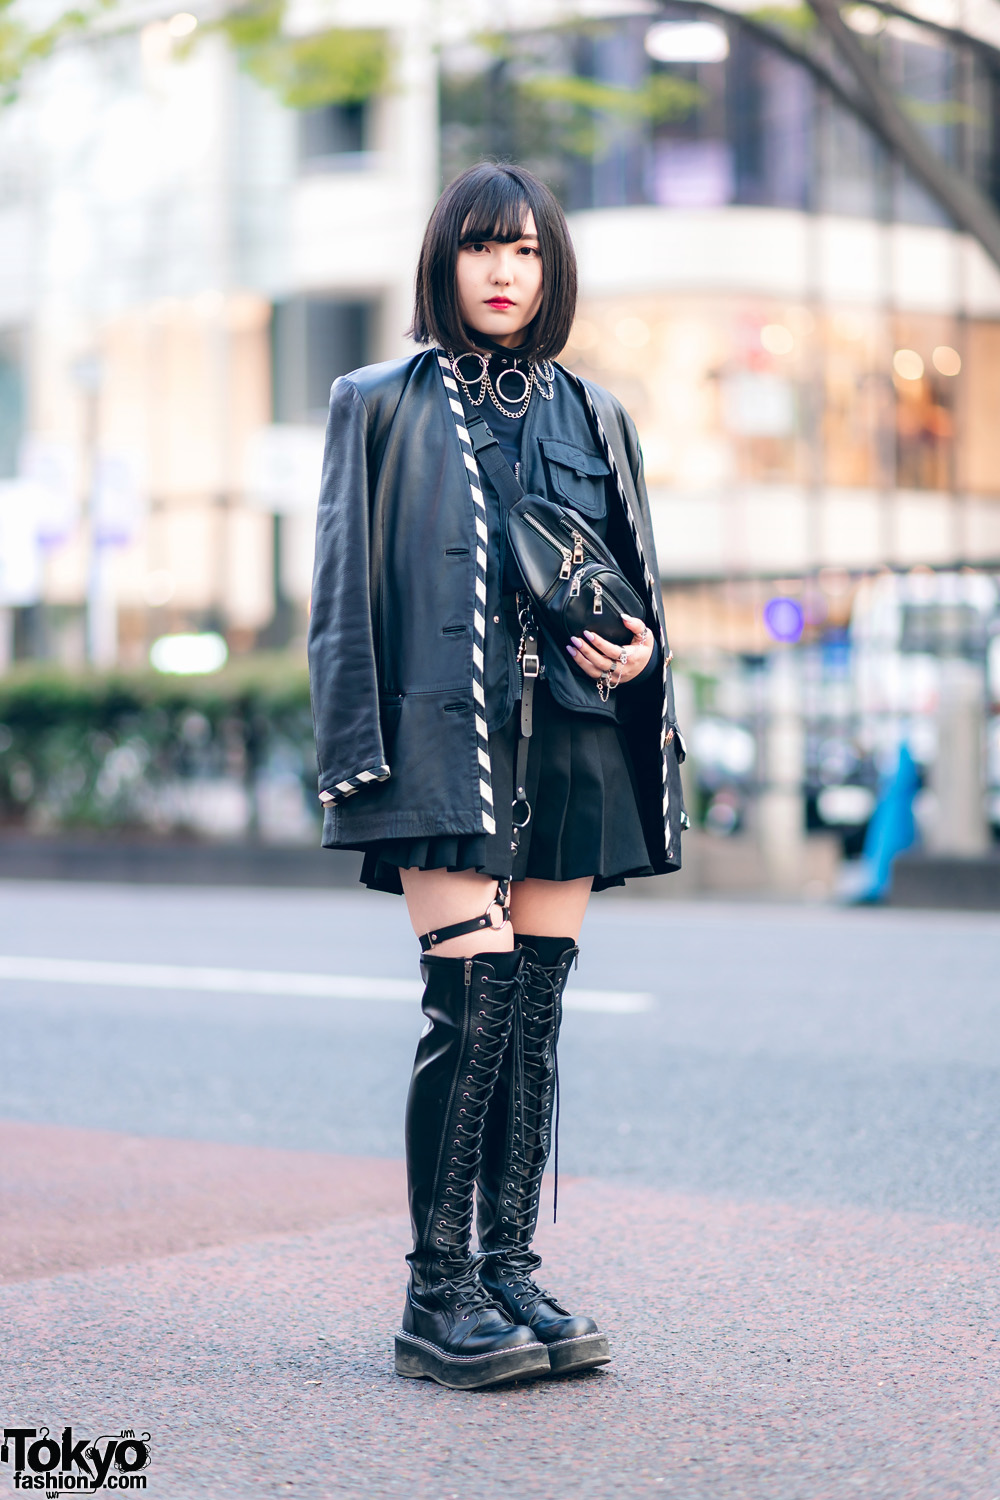 All Black Harajuku Streetwear Style w/ Fringed Bob, O-Ring Choker, Faux Leather Coat, Utility Vest, Pleated Skirt, Waist Bag & Thigh High Boots